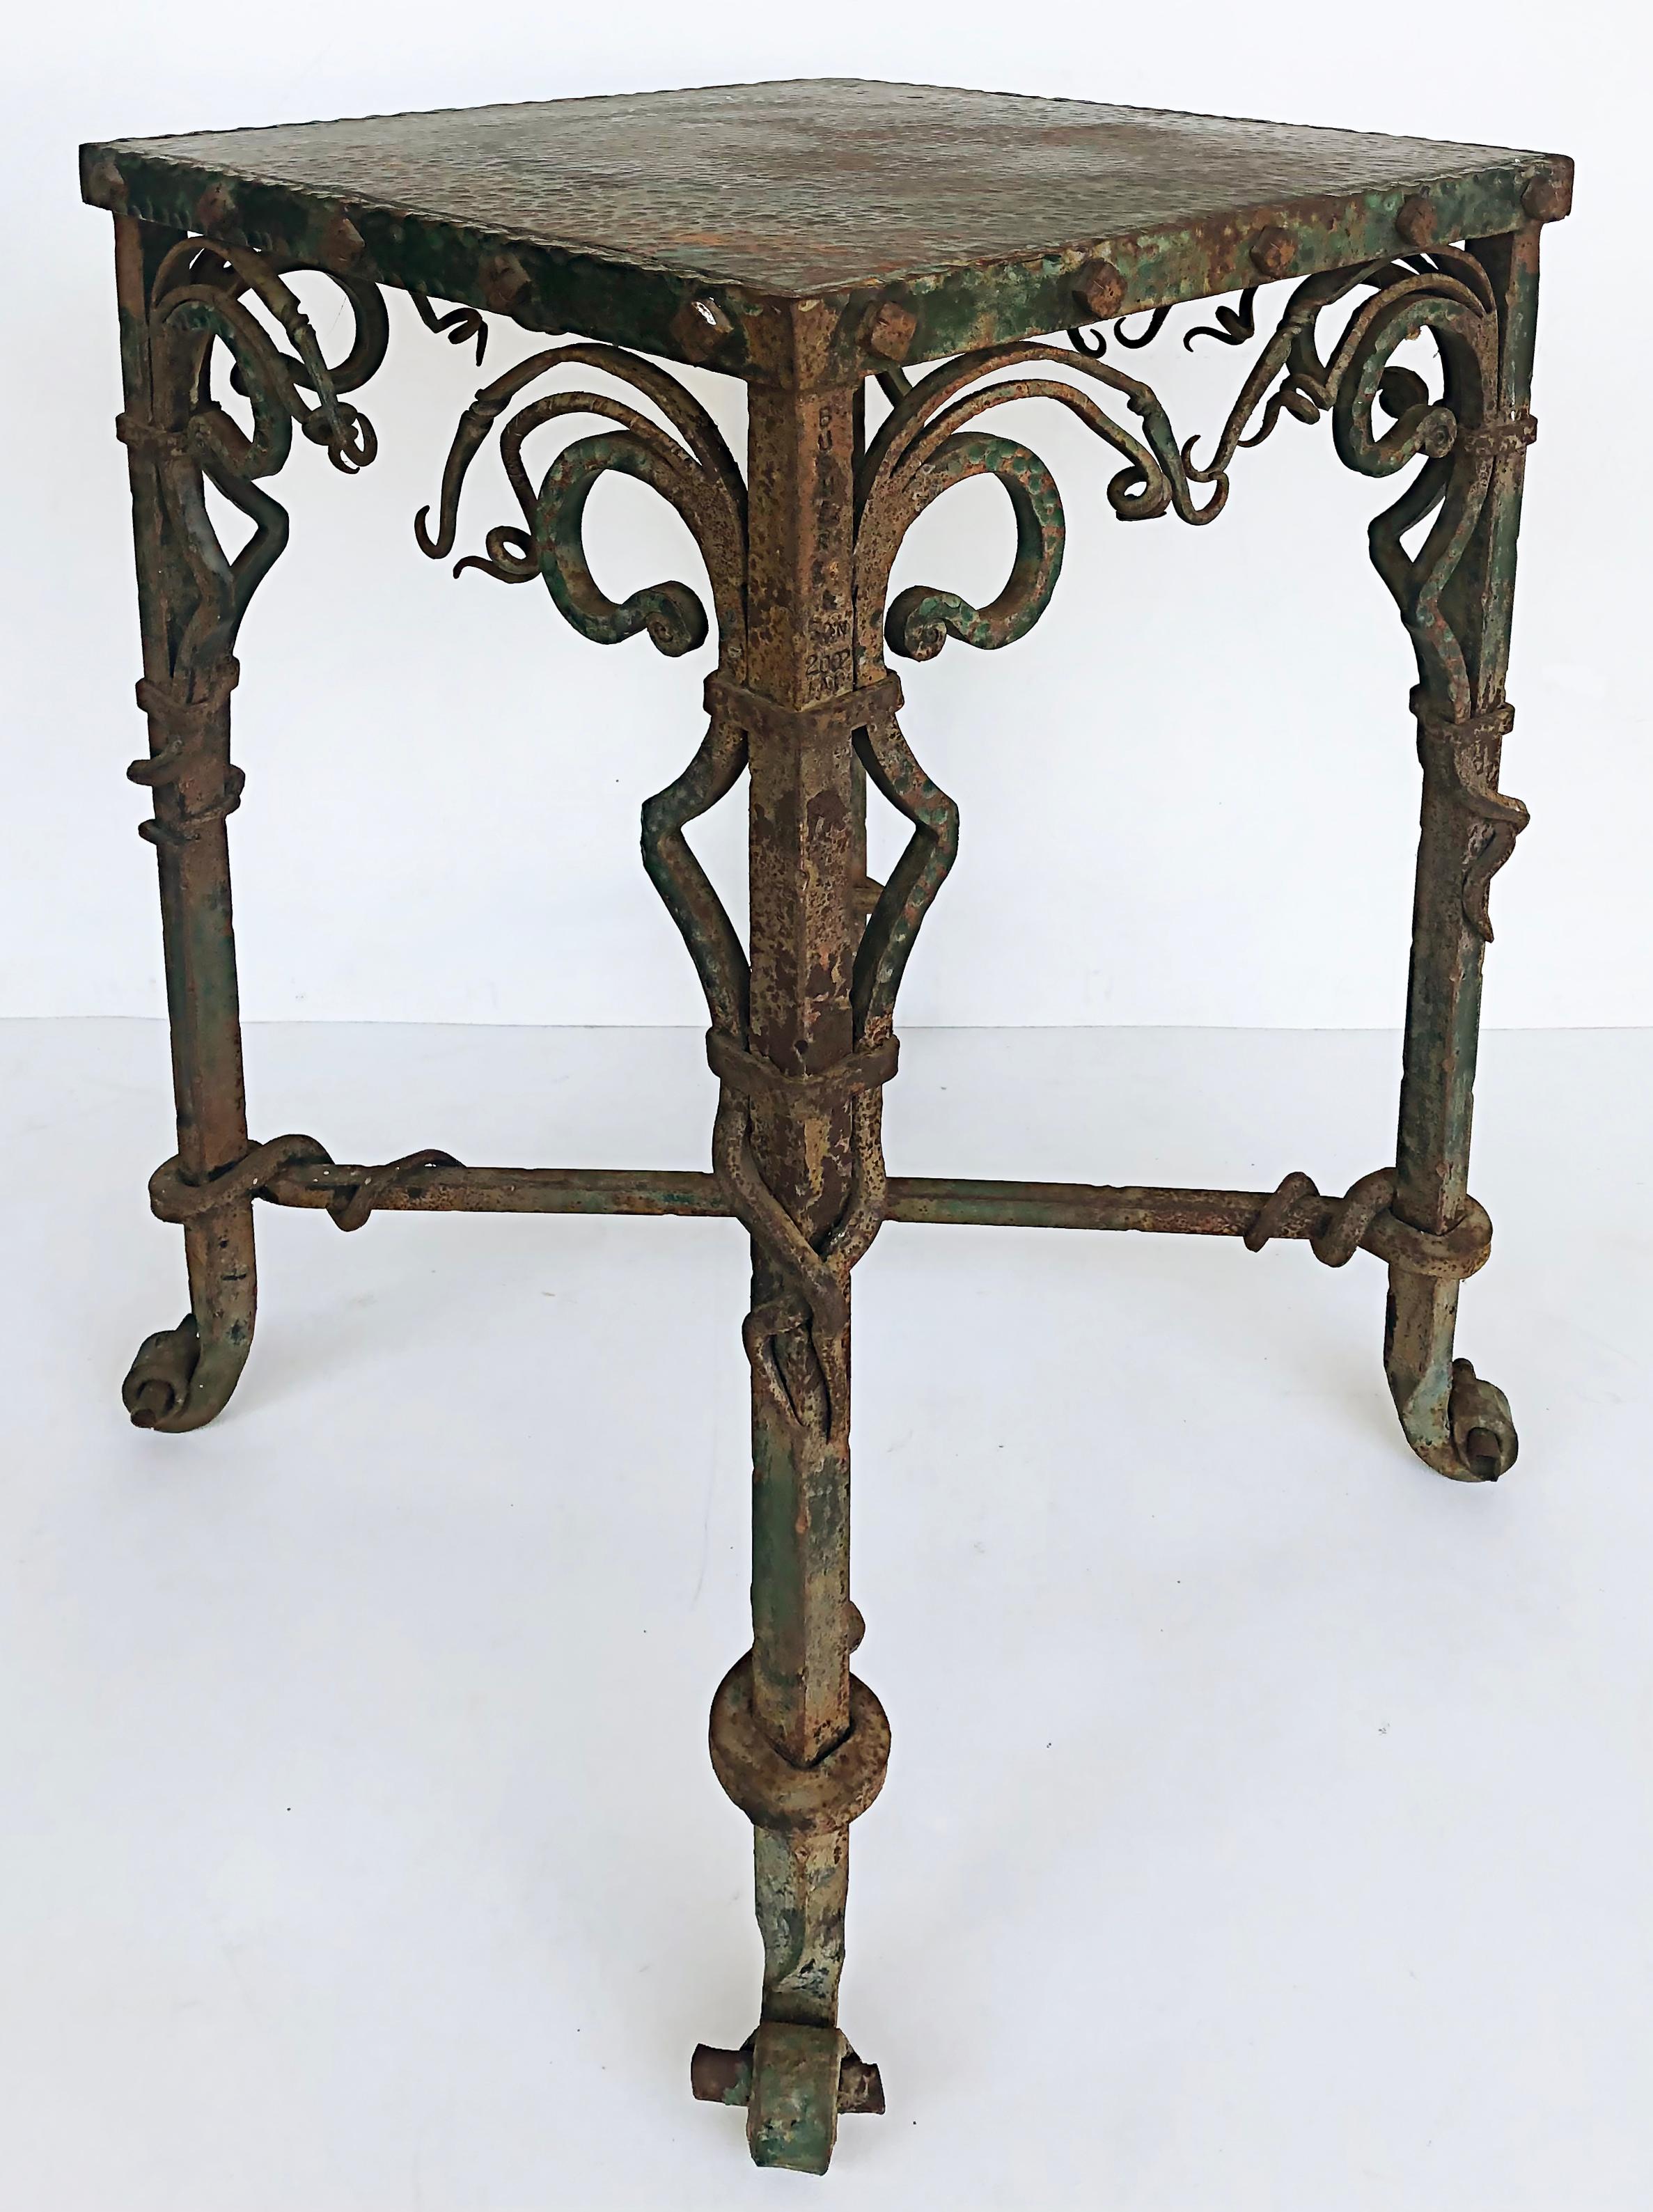 Buschere & Son wrought iron hammered copper side/table/plant stand/pedestal

Offered for sale is a Buschere & Son hand-wrought plant stand/pedestal/side table with a hammered copper top. This exquisite piece shows the intricate ironwork associated